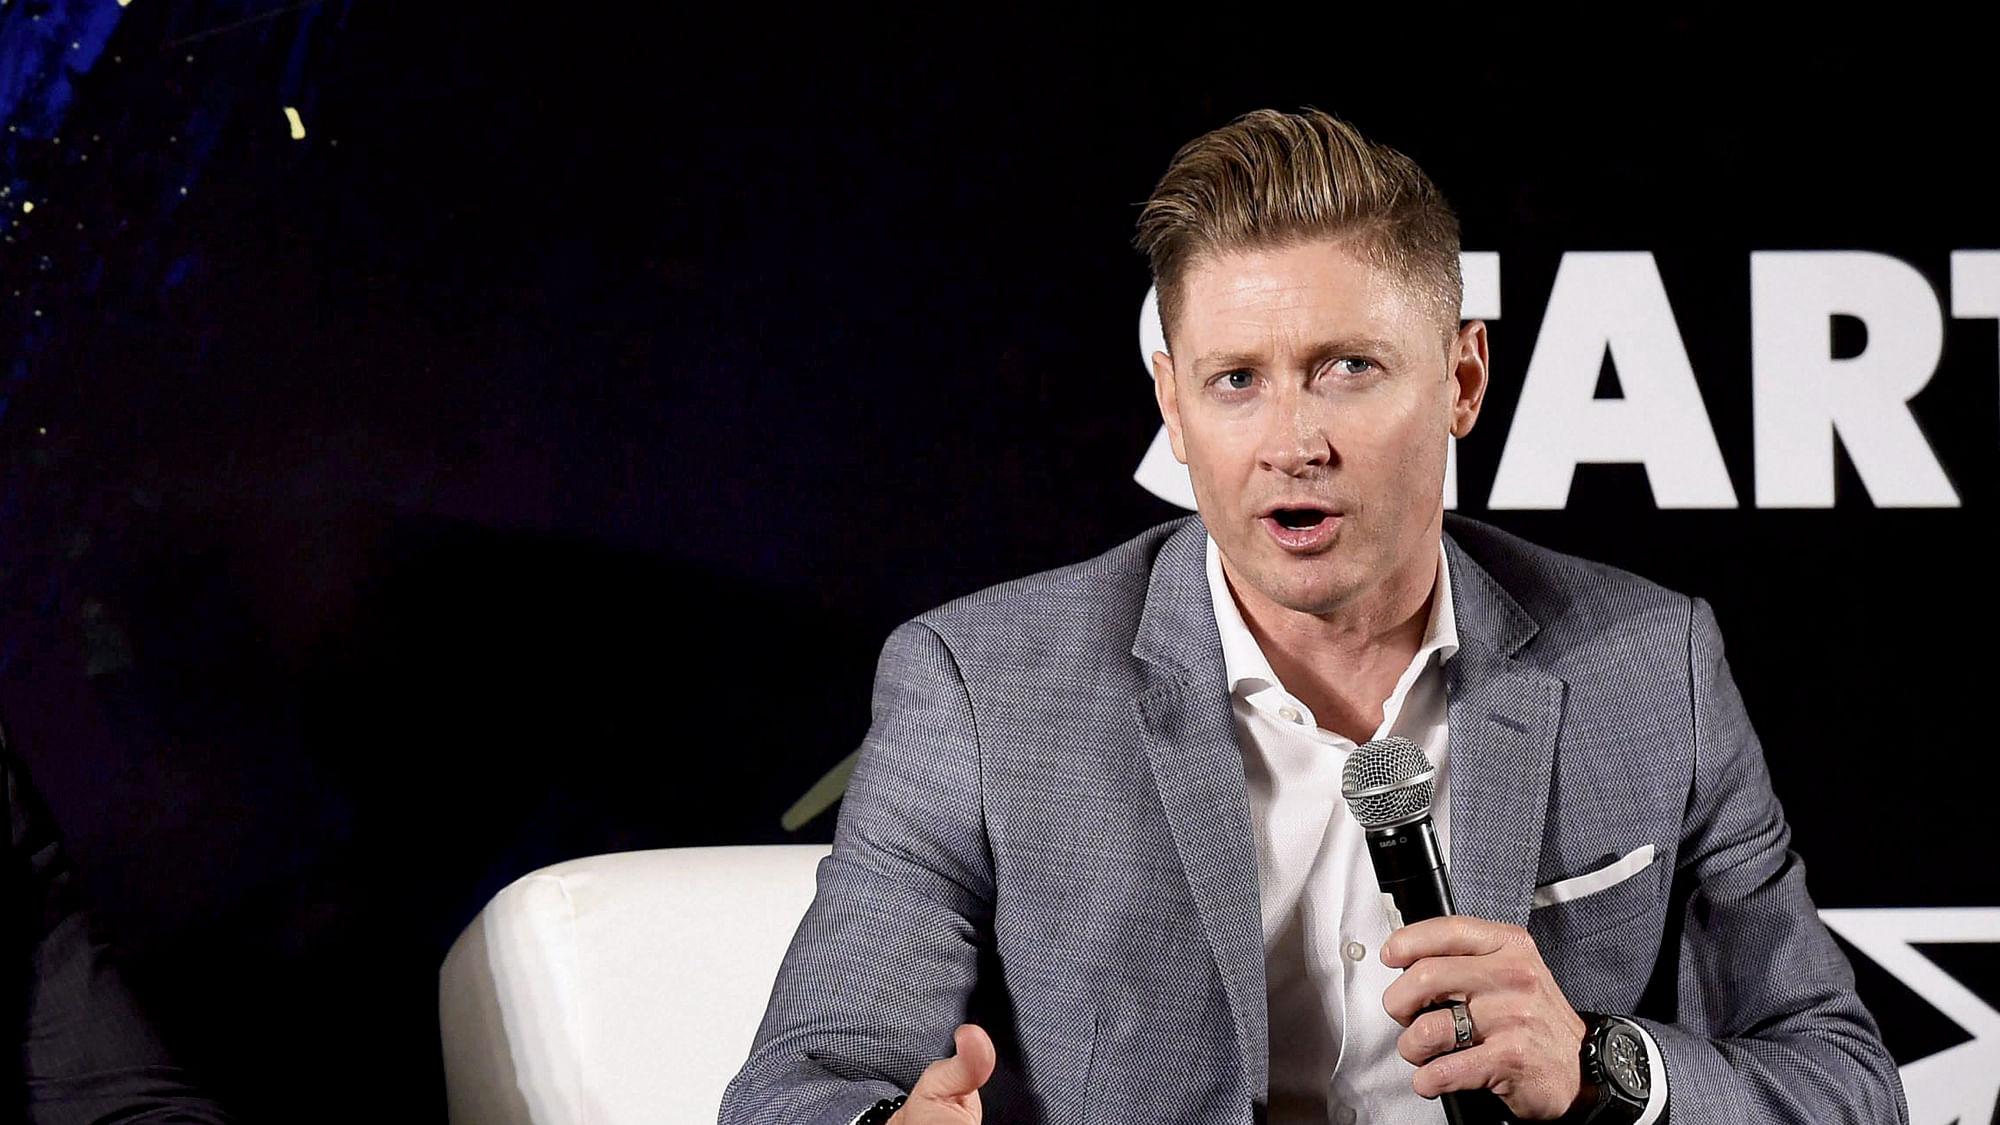 Michael Clarke has said Australians were “scared” of sledging India captain Virat Kohli in order to protect their IPL deals.